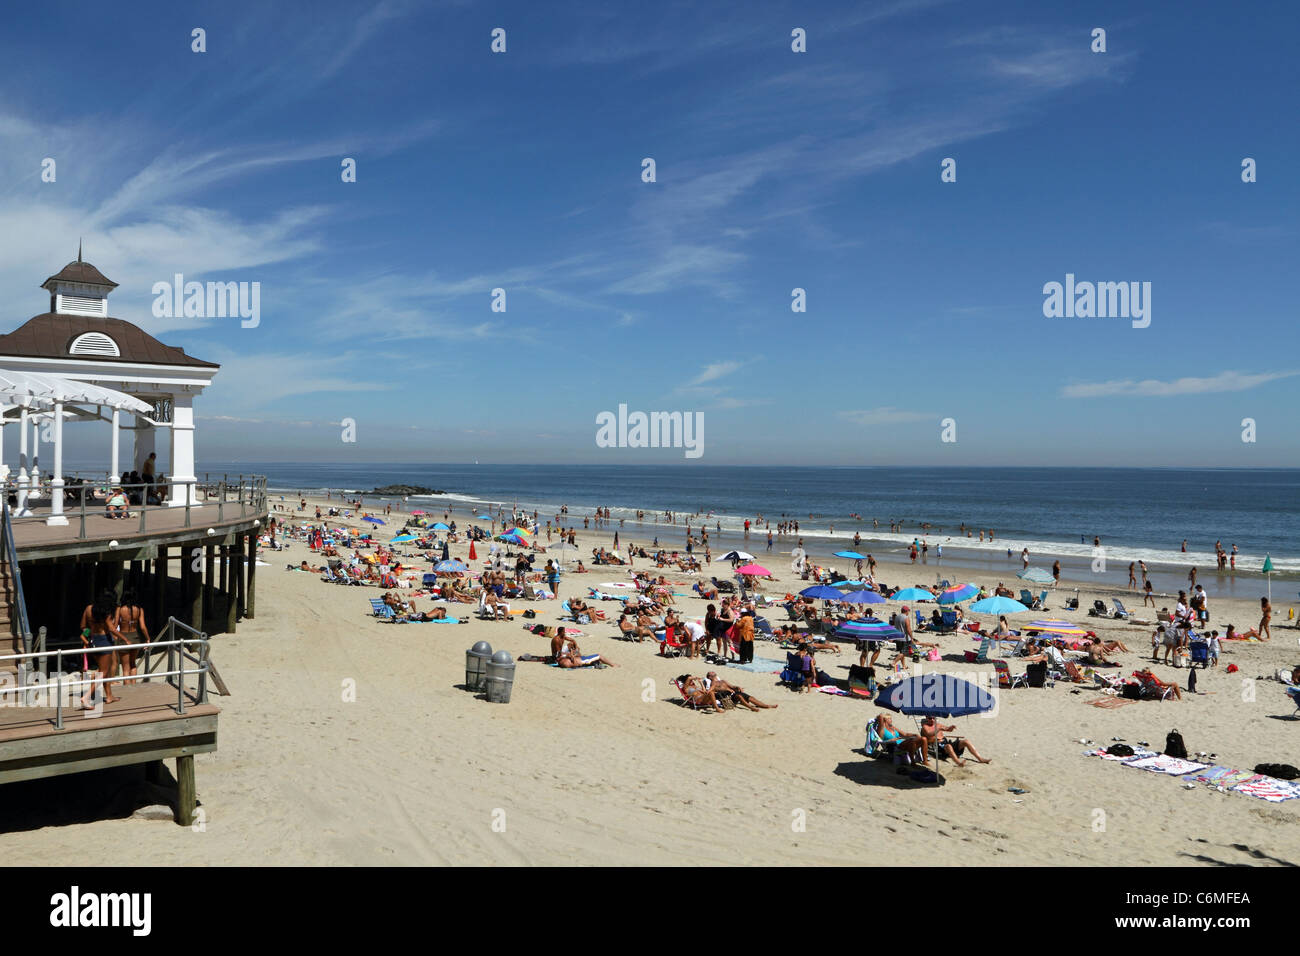 https://c8.alamy.com/comp/C6MFEA/the-beach-in-long-branch-new-jersey-usa-a-popular-shore-destination-C6MFEA.jpg